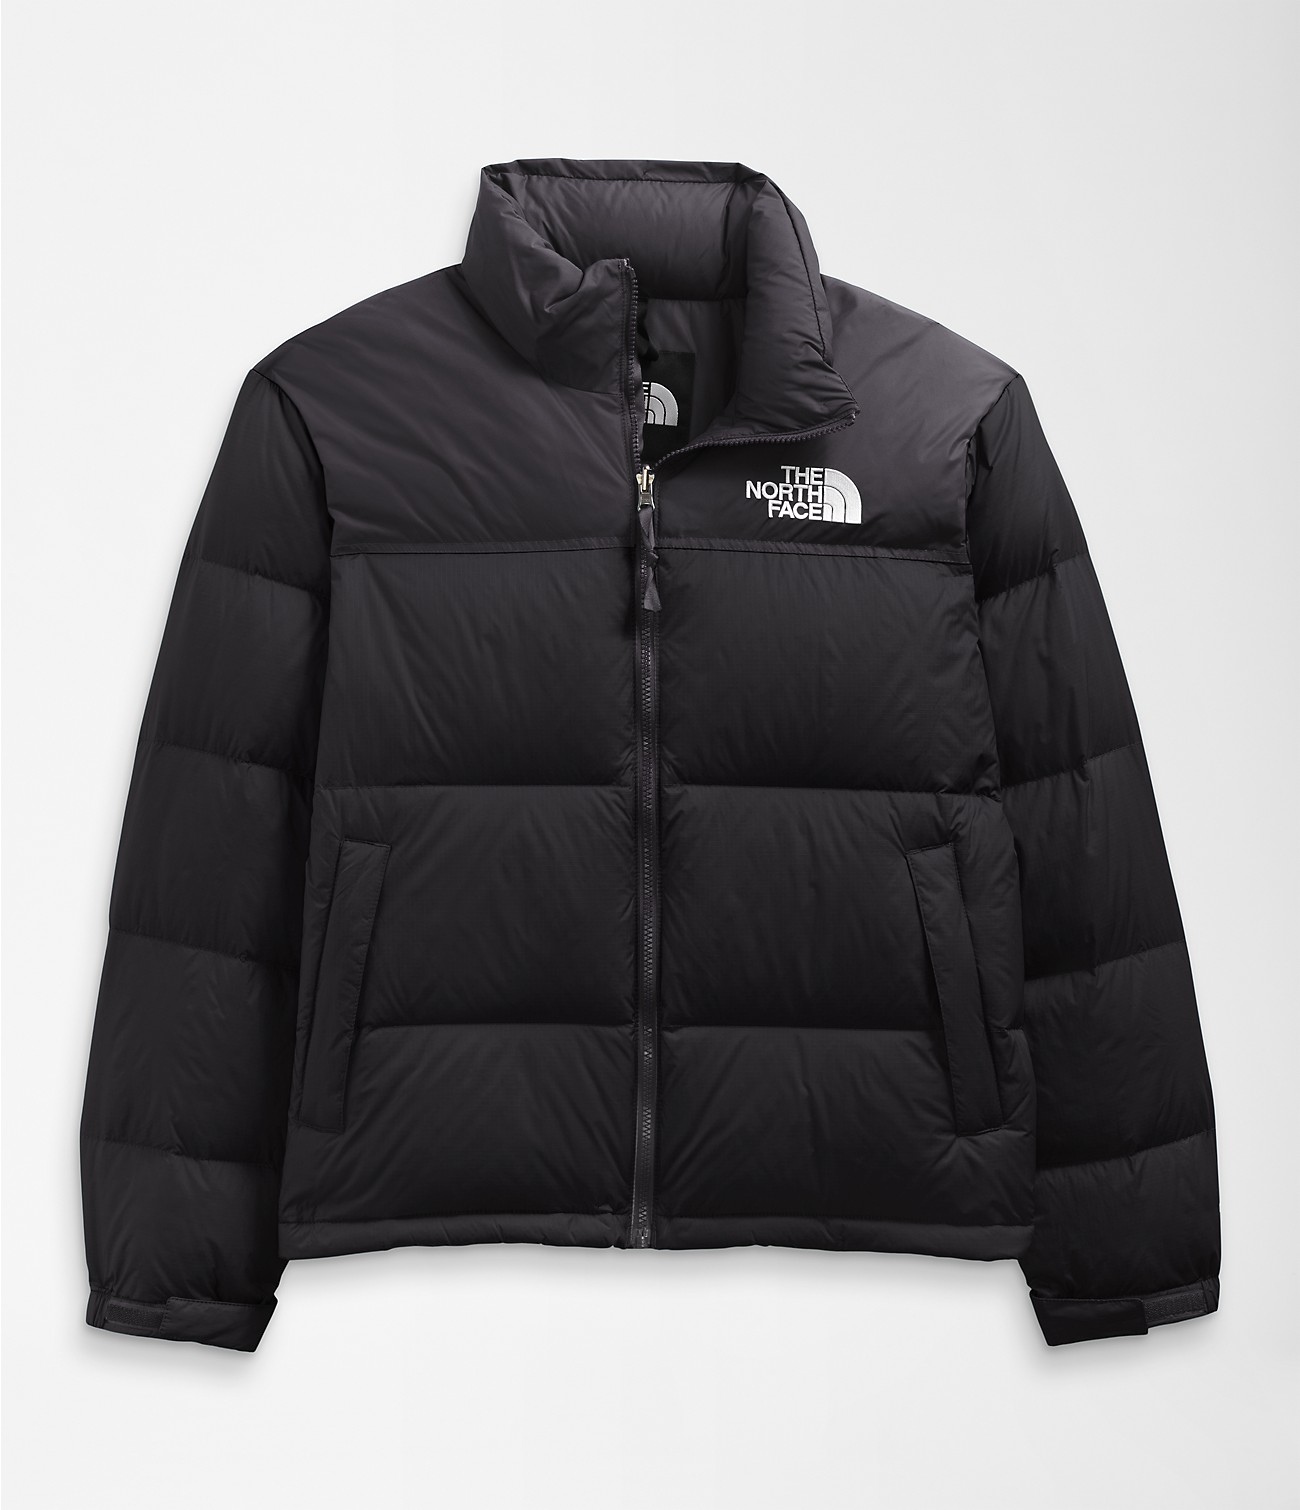 Unlock Wilderness' choice in the Stone Island Vs North Face comparison, the 1996 Retro Nuptse Jacket by The North Face